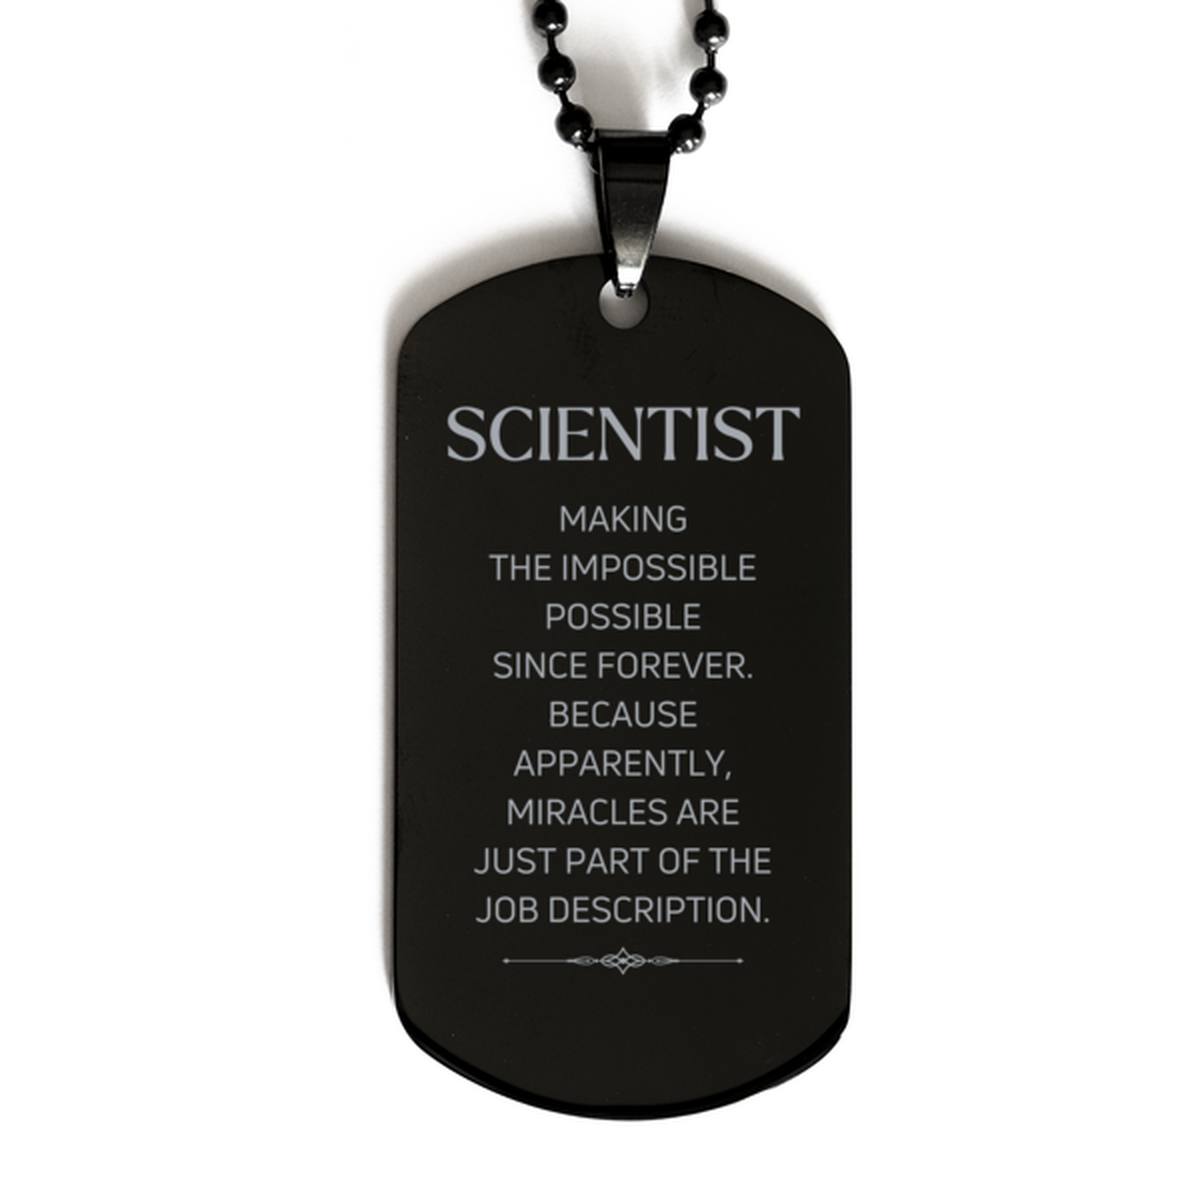 Funny Scientist Gifts, Miracles are just part of the job description, Inspirational Birthday Black Dog Tag For Scientist, Men, Women, Coworkers, Friends, Boss